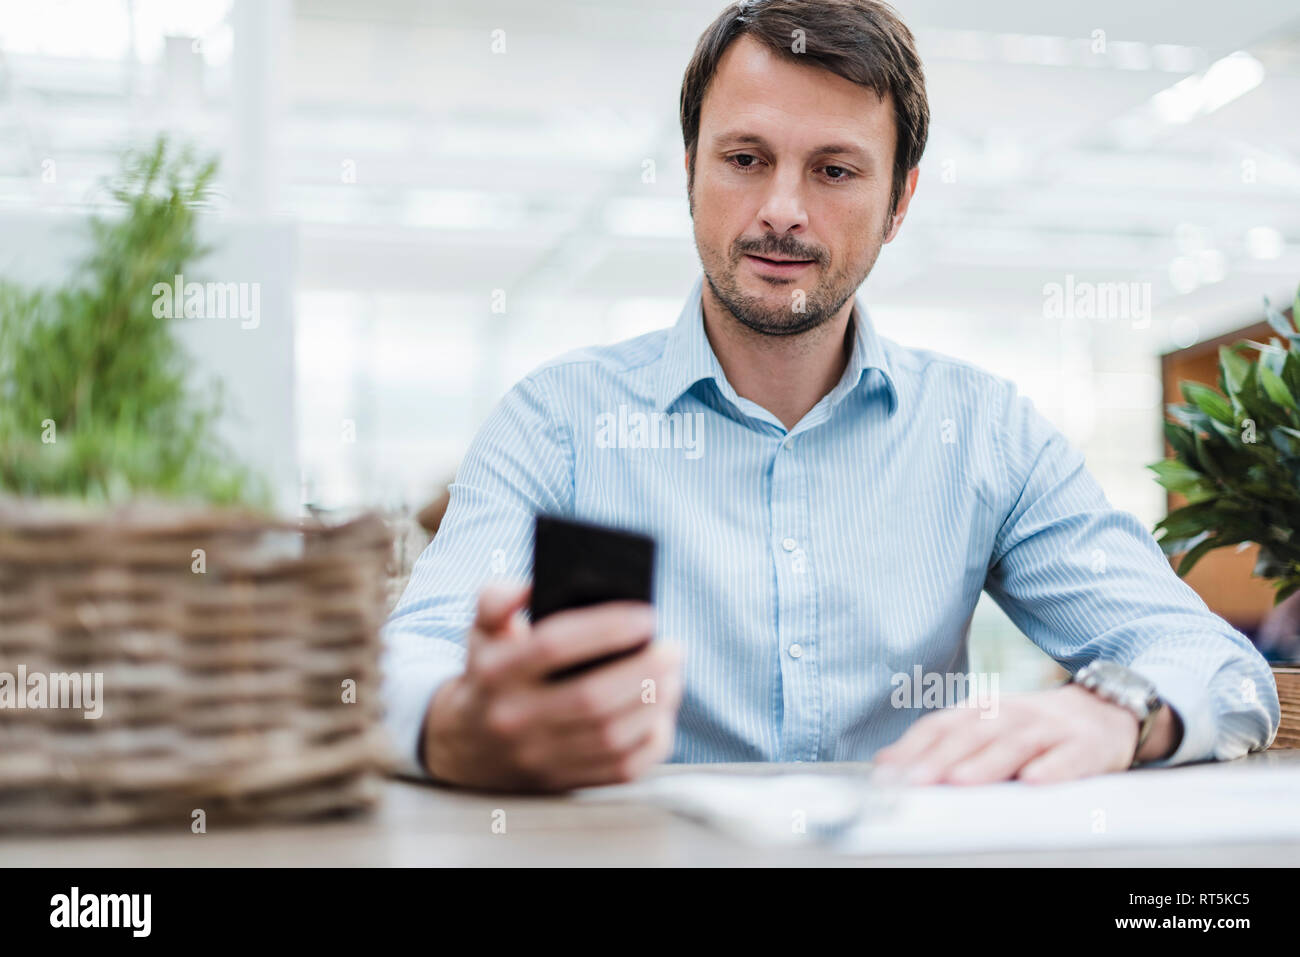 Businessman working in office, using smartphone Banque D'Images